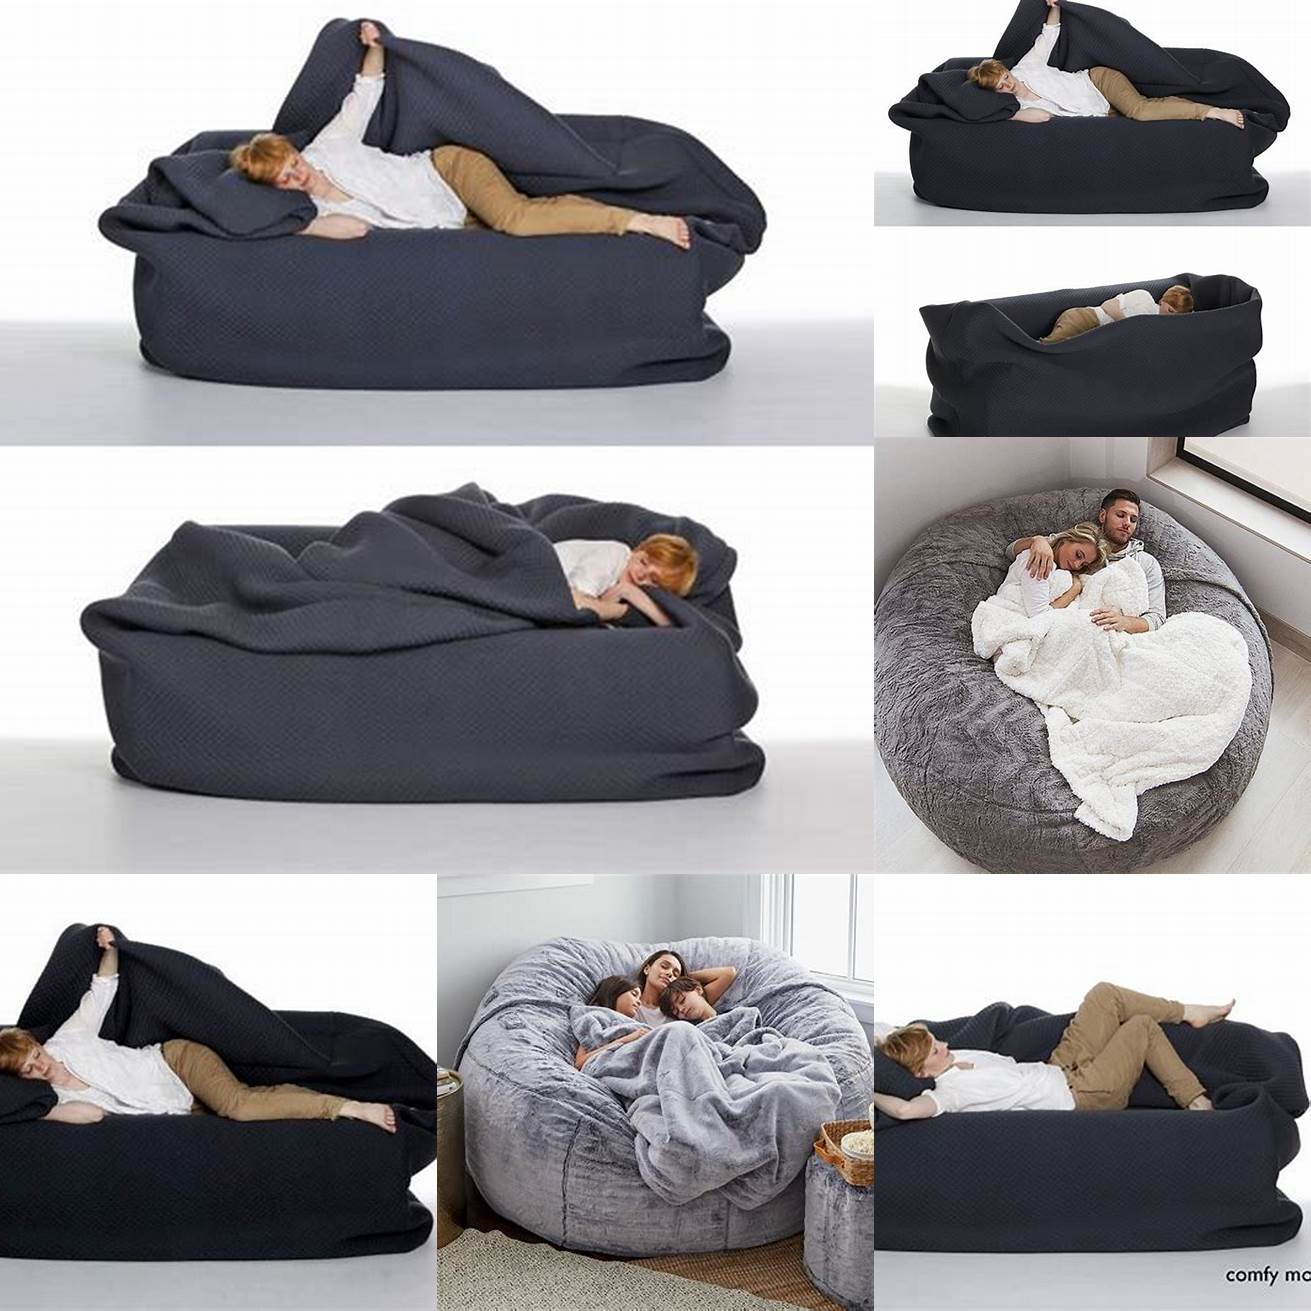 Image of the Bean Bag Bed with Built In Blanket in a living room or bedroom setting